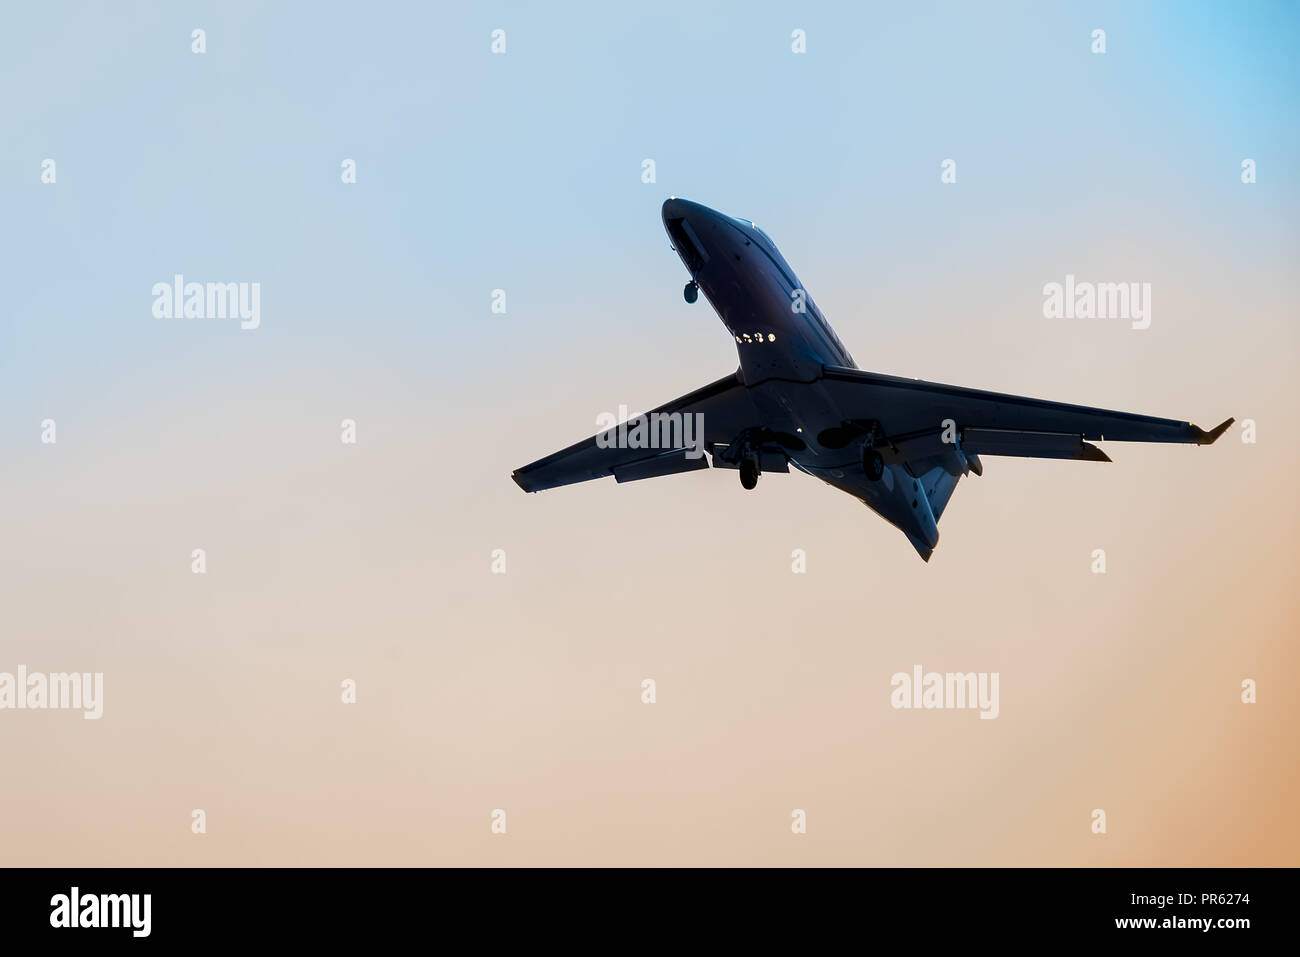 Big airplane flying high with detail of the land gear down Stock Photo